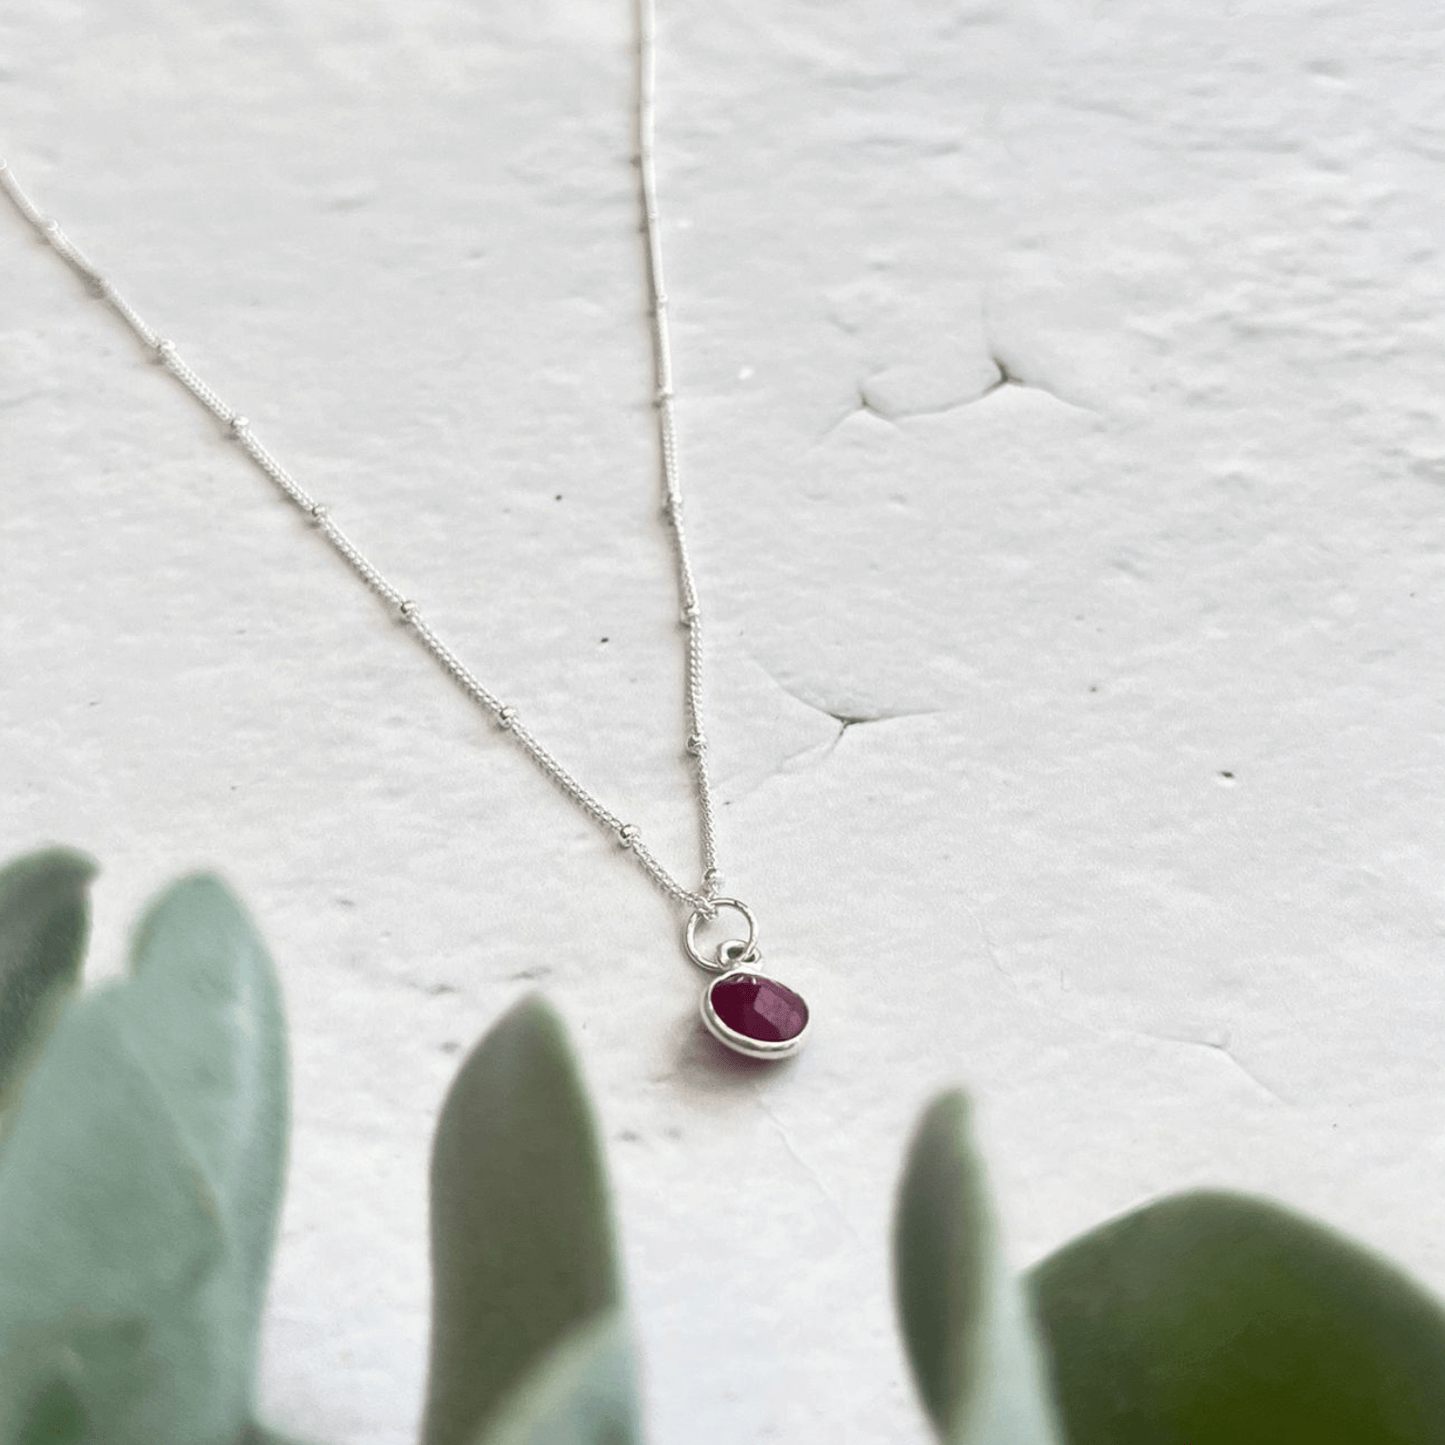 A delicate 925 sterling silver Ruby Birthstone Necklace by Made Here with Love is laid out on a white textured surface. In the foreground, blurred green leaves partially obscure the bottom of the image, adding a touch of natural contrast. This July birthday gift exudes elegance and charm.